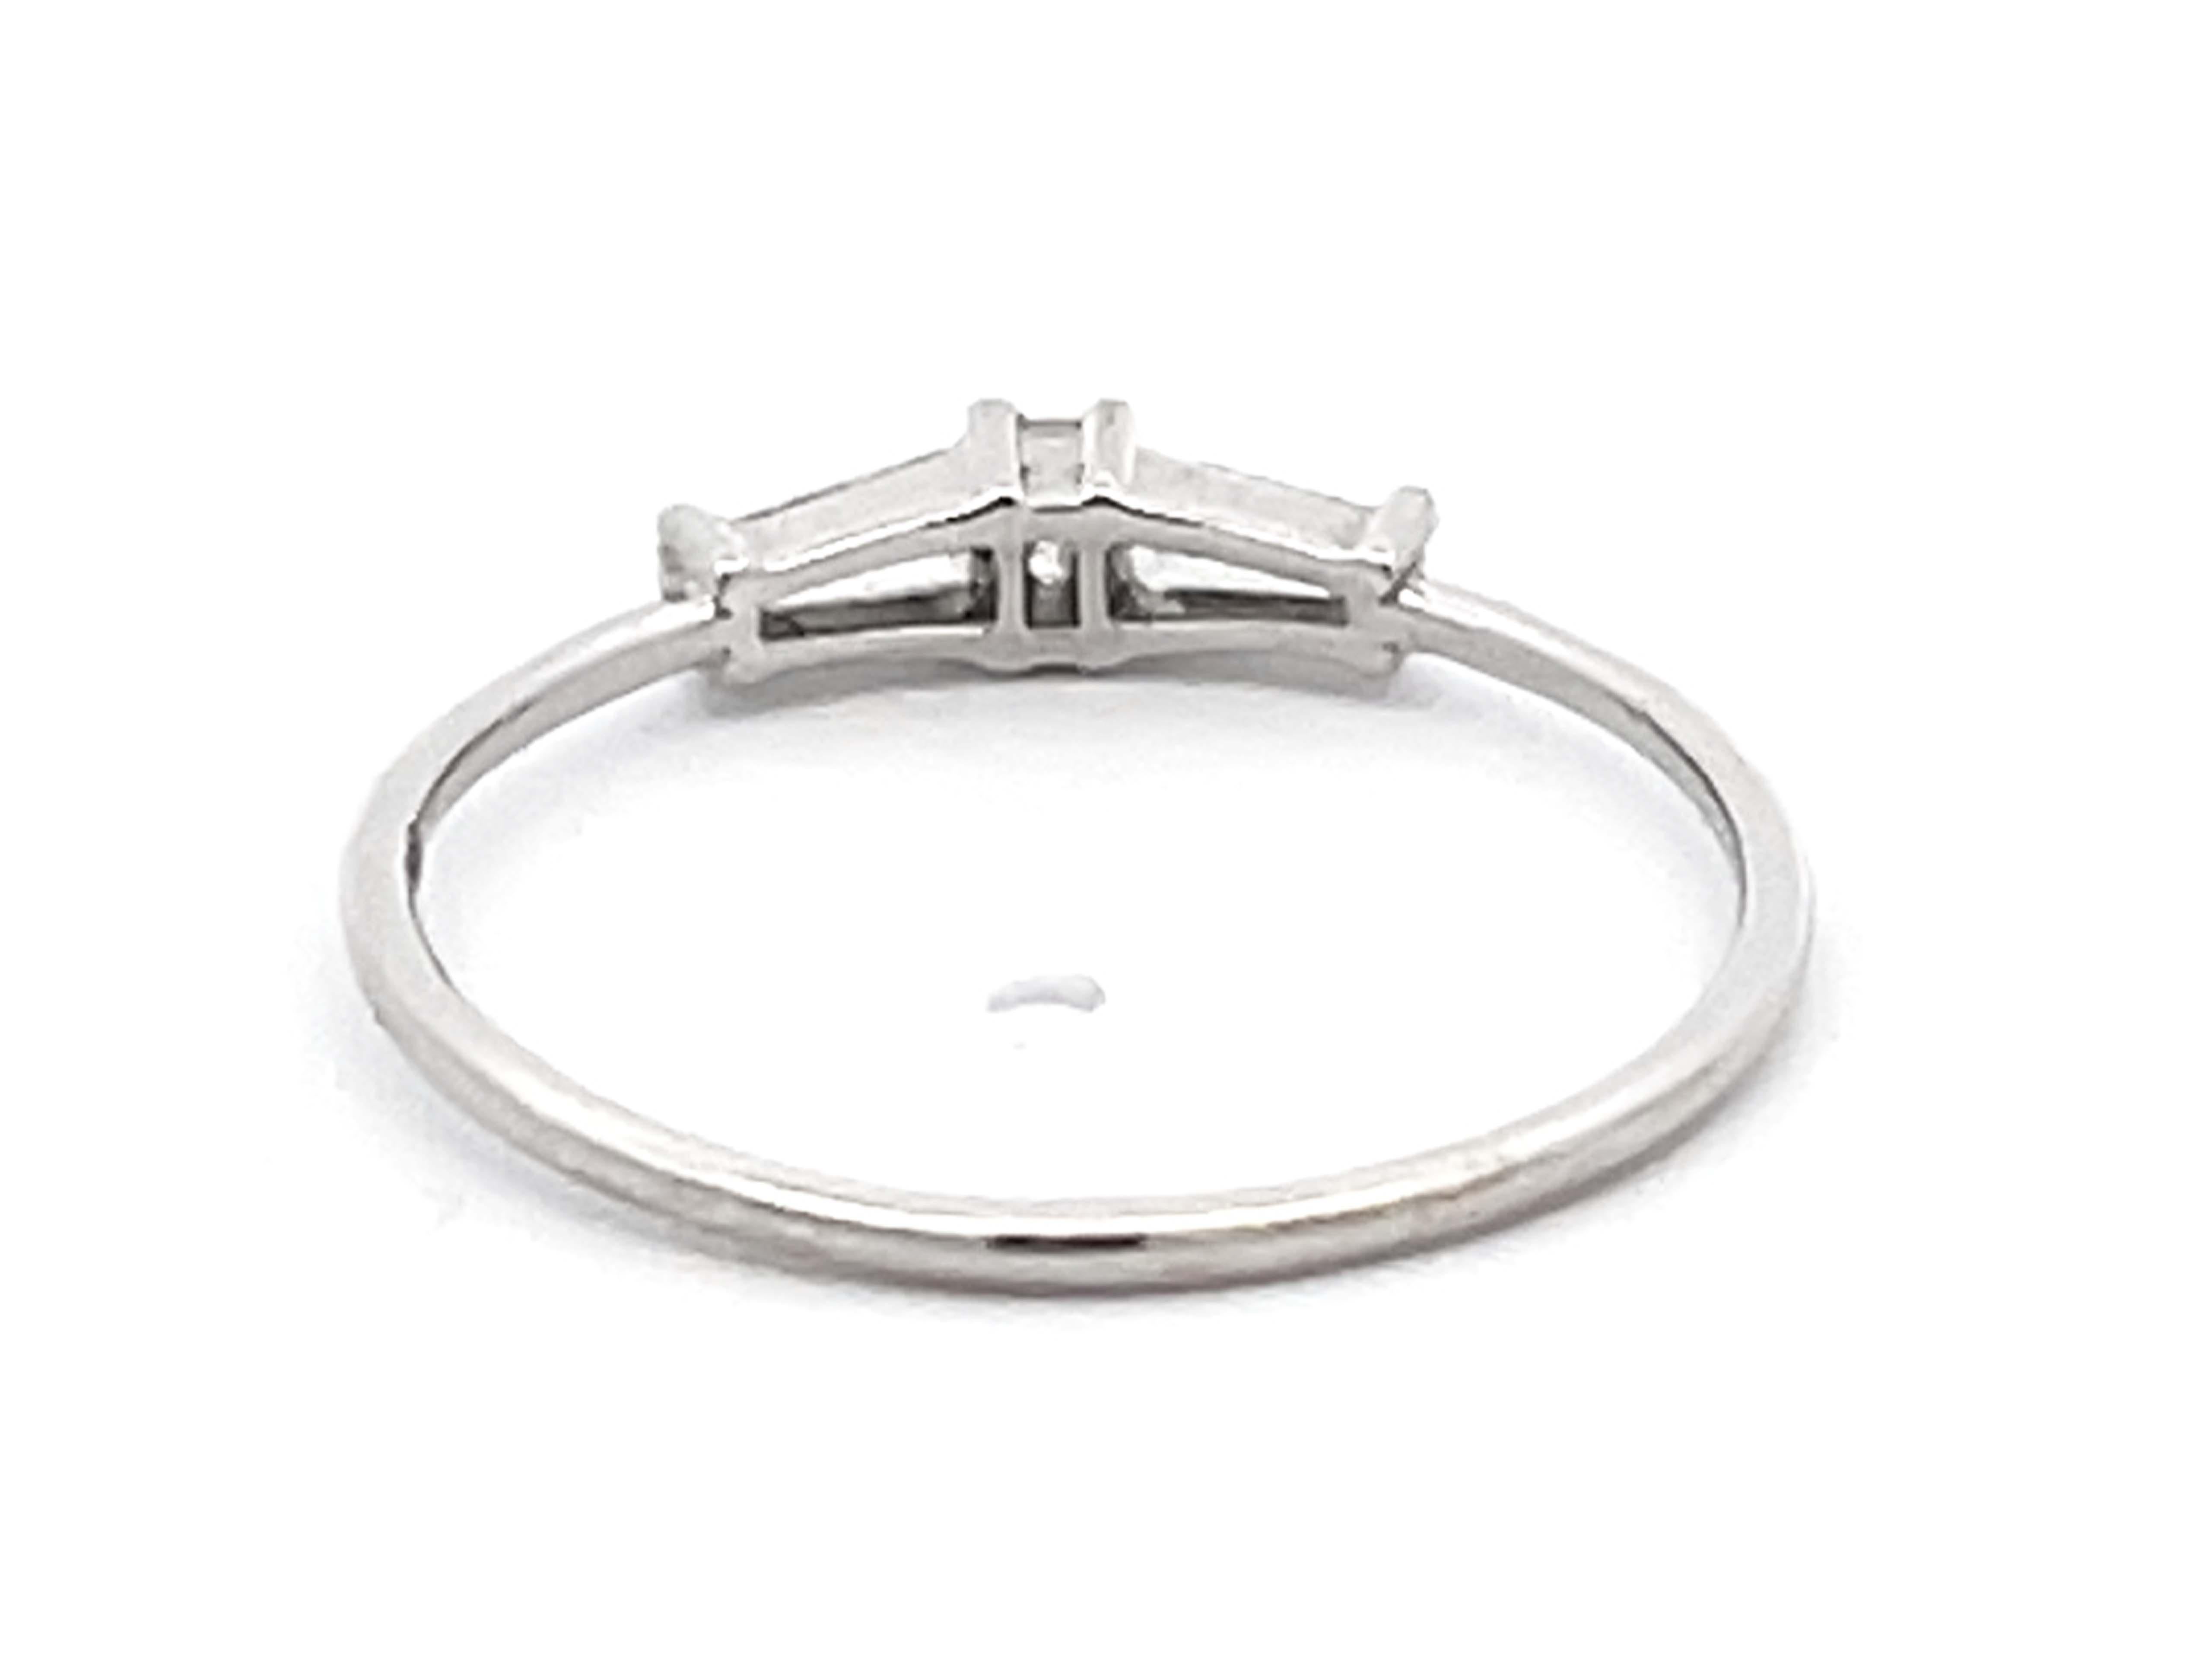 Three Baguette Diamond Thin Band Ring in 14k White Gold 1